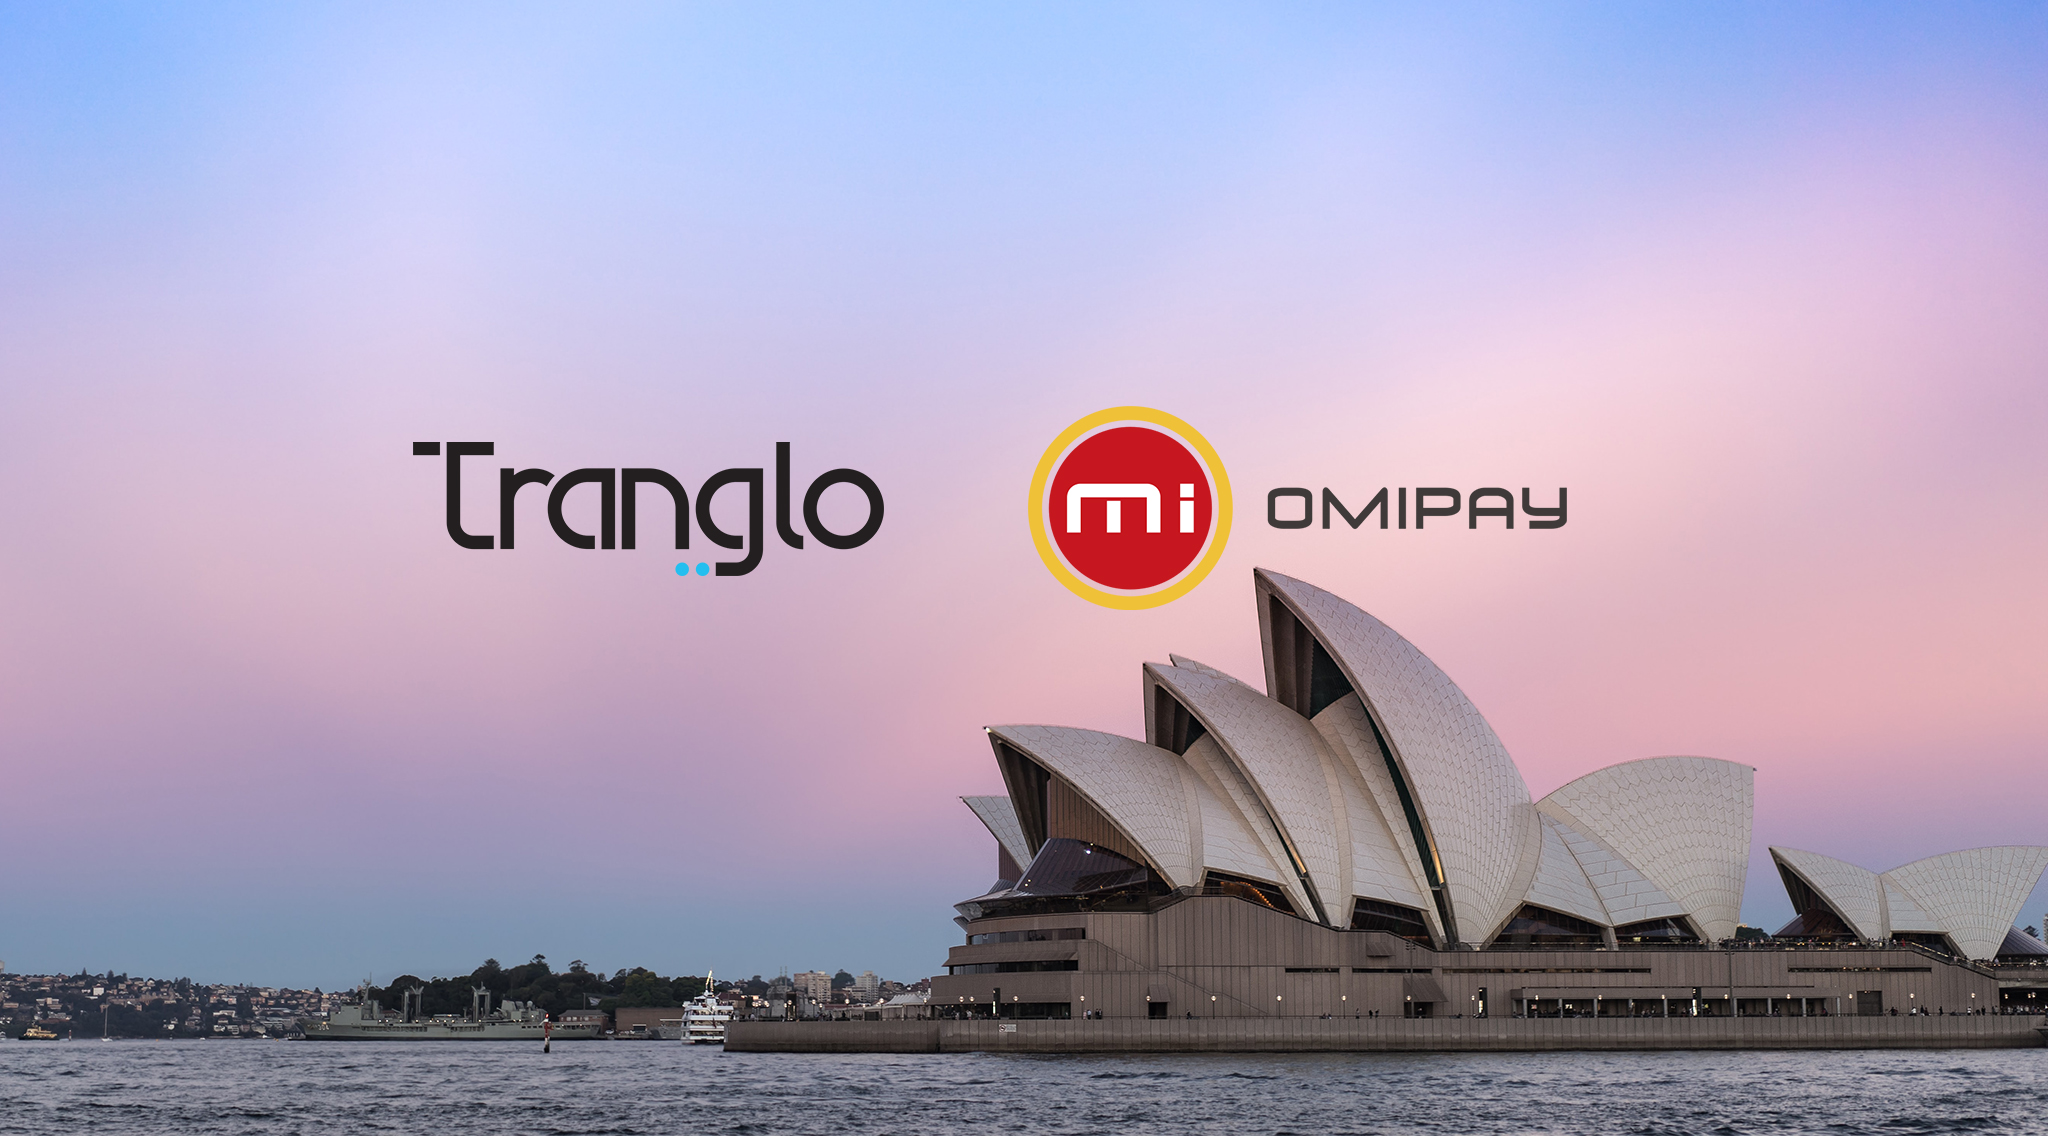 Tranglo Powers Cross-Border Payments for Australian Payments Firm Omipay